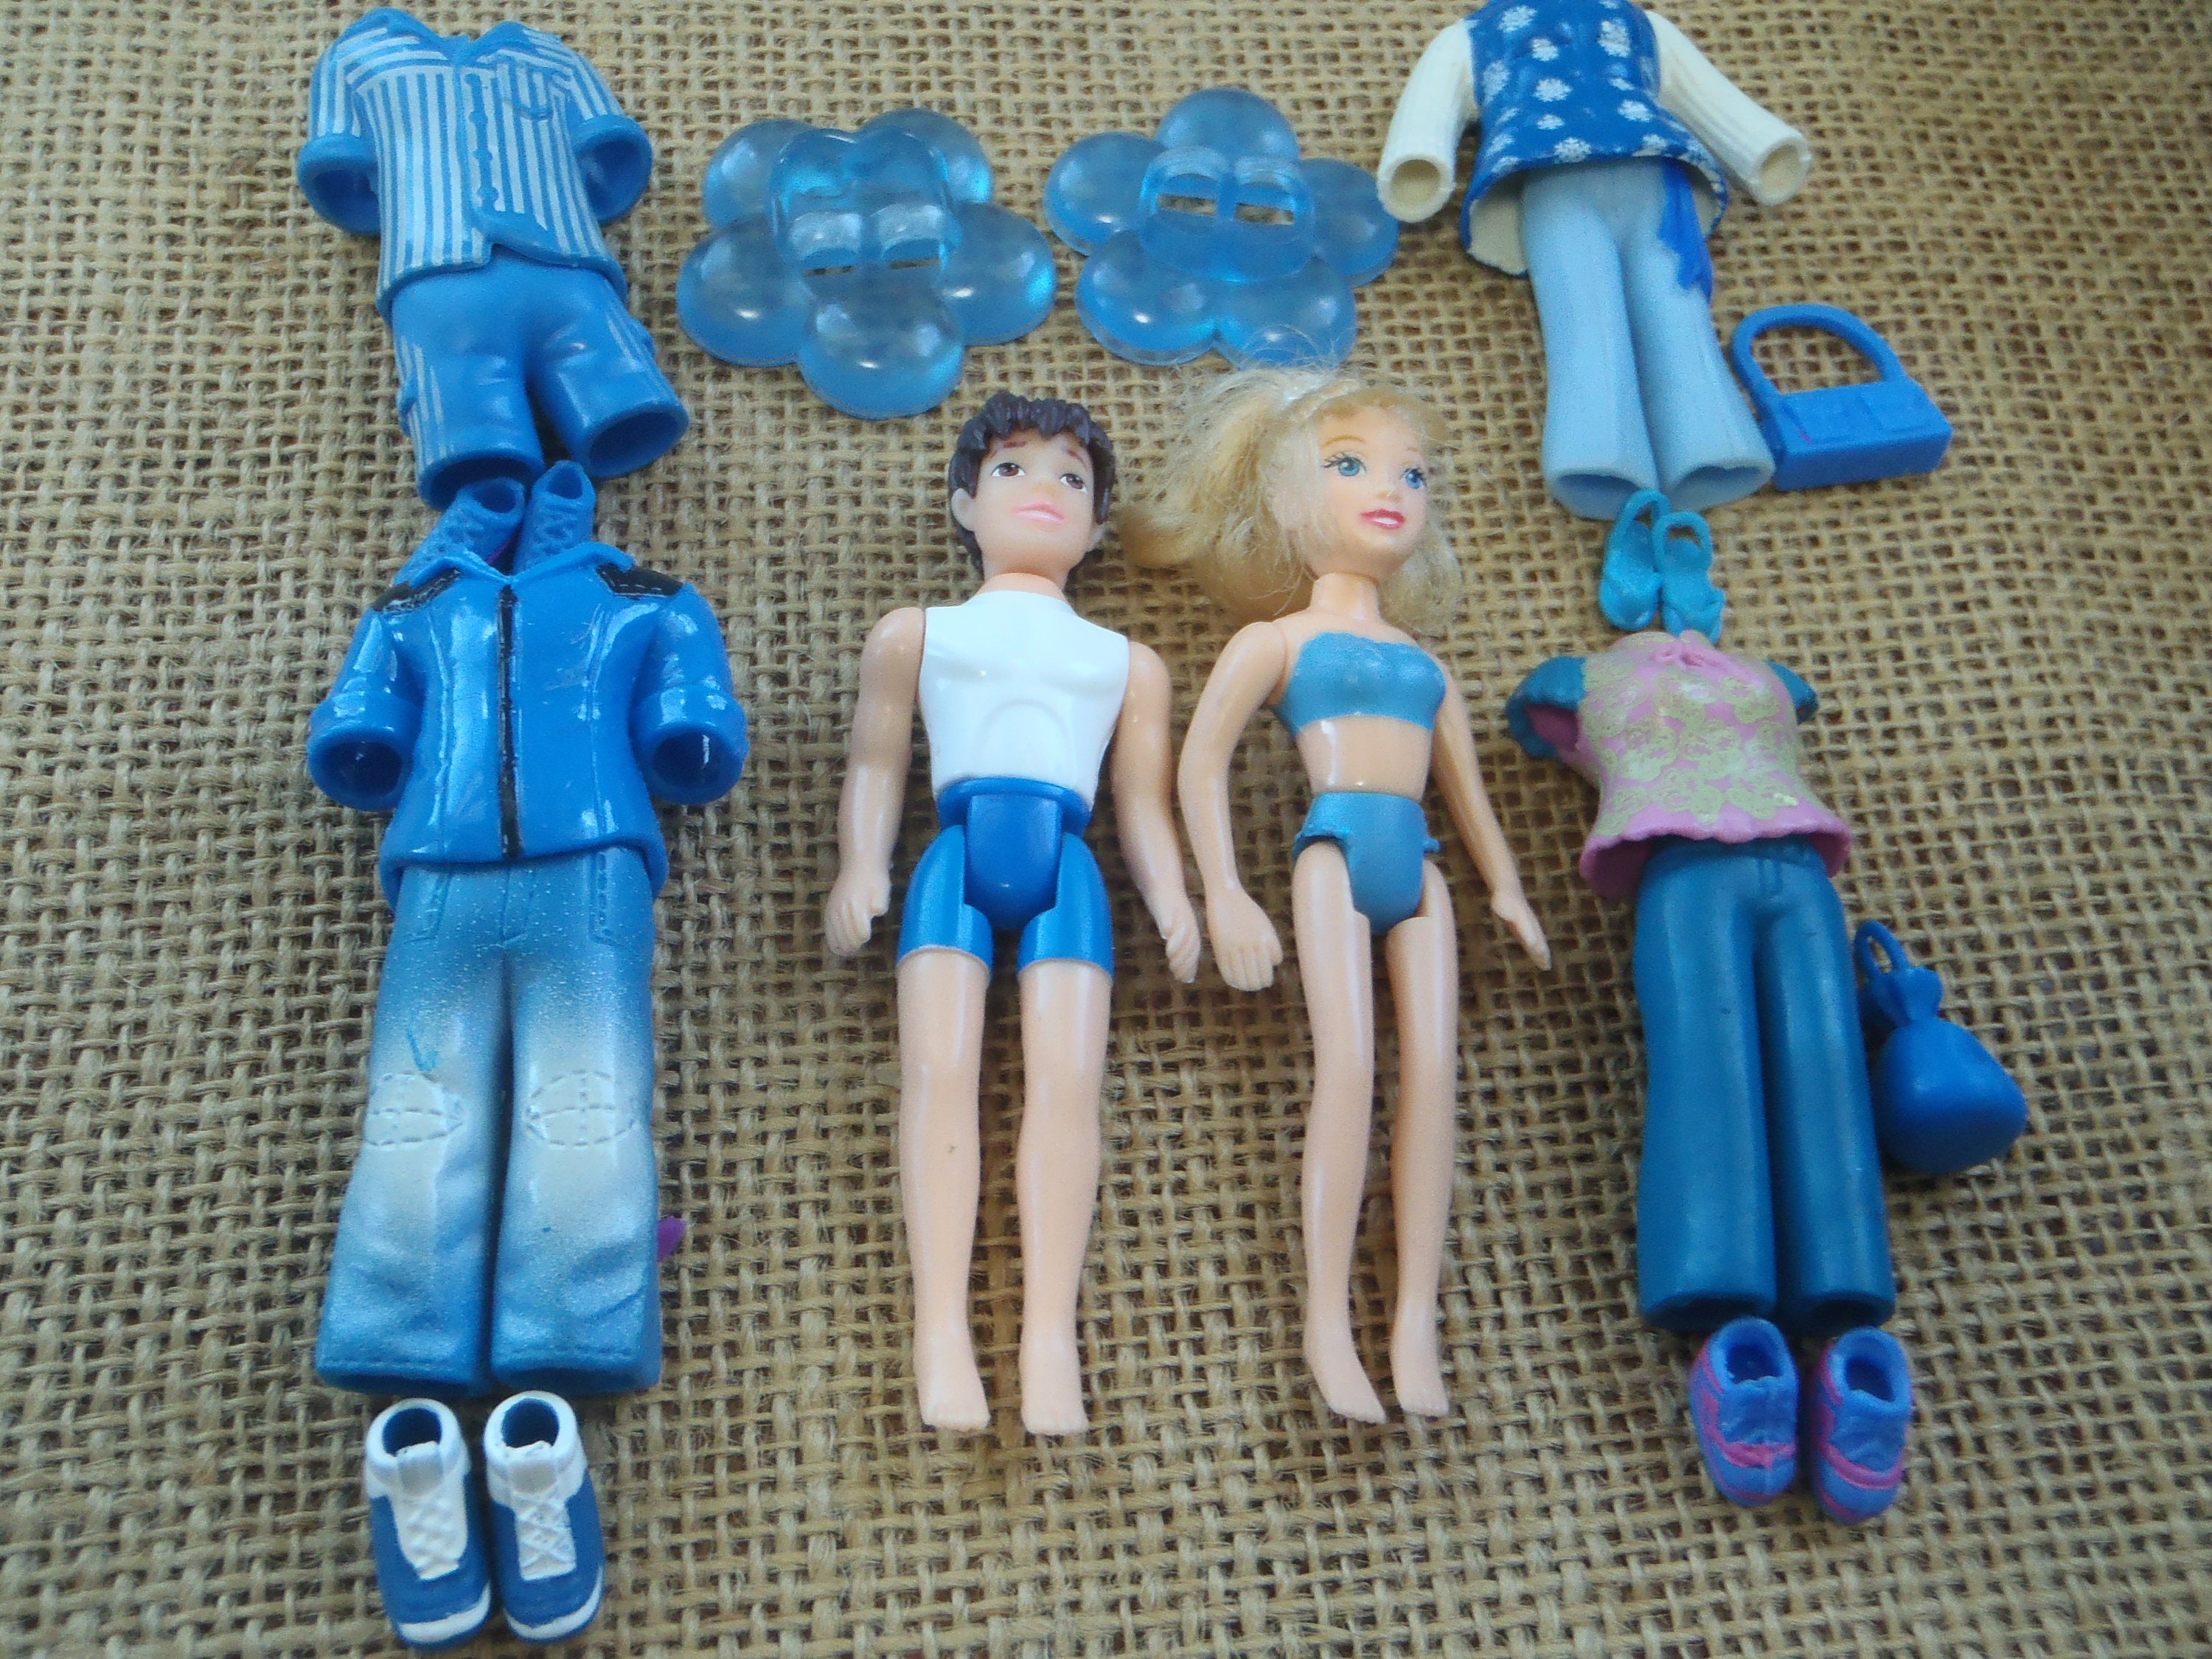 7 Polly Pocket Dolls with Rooted Hair - 6 girls 1 boy with Extra Clothes